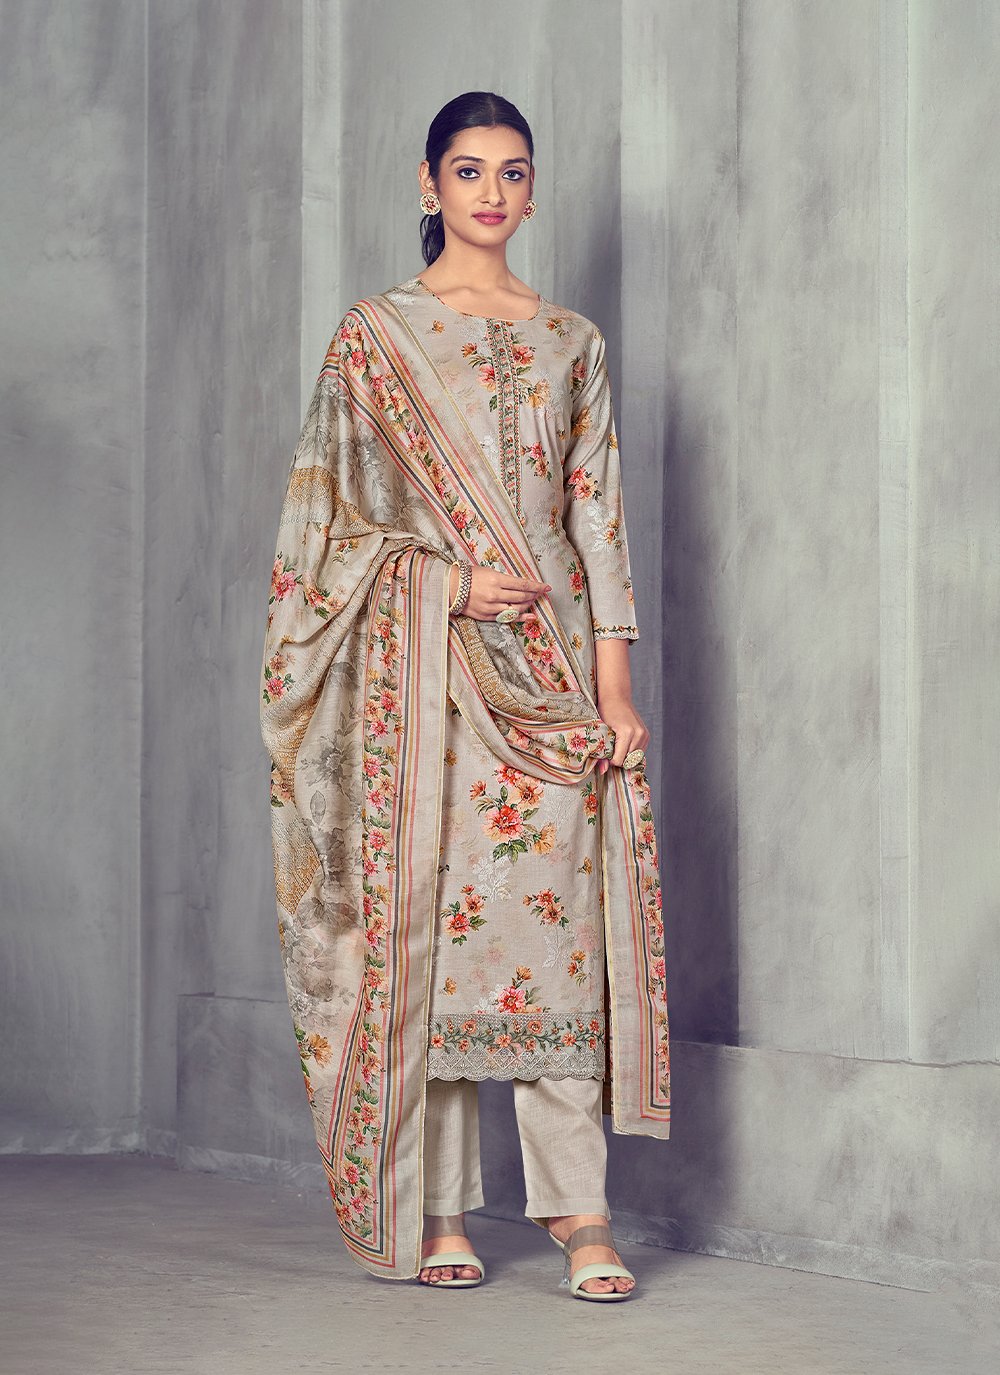 Buy Bitra Unstitched Pakistani Print Cotton Suits with Embroidery Dress  Materials (Orange) at Amazon.in